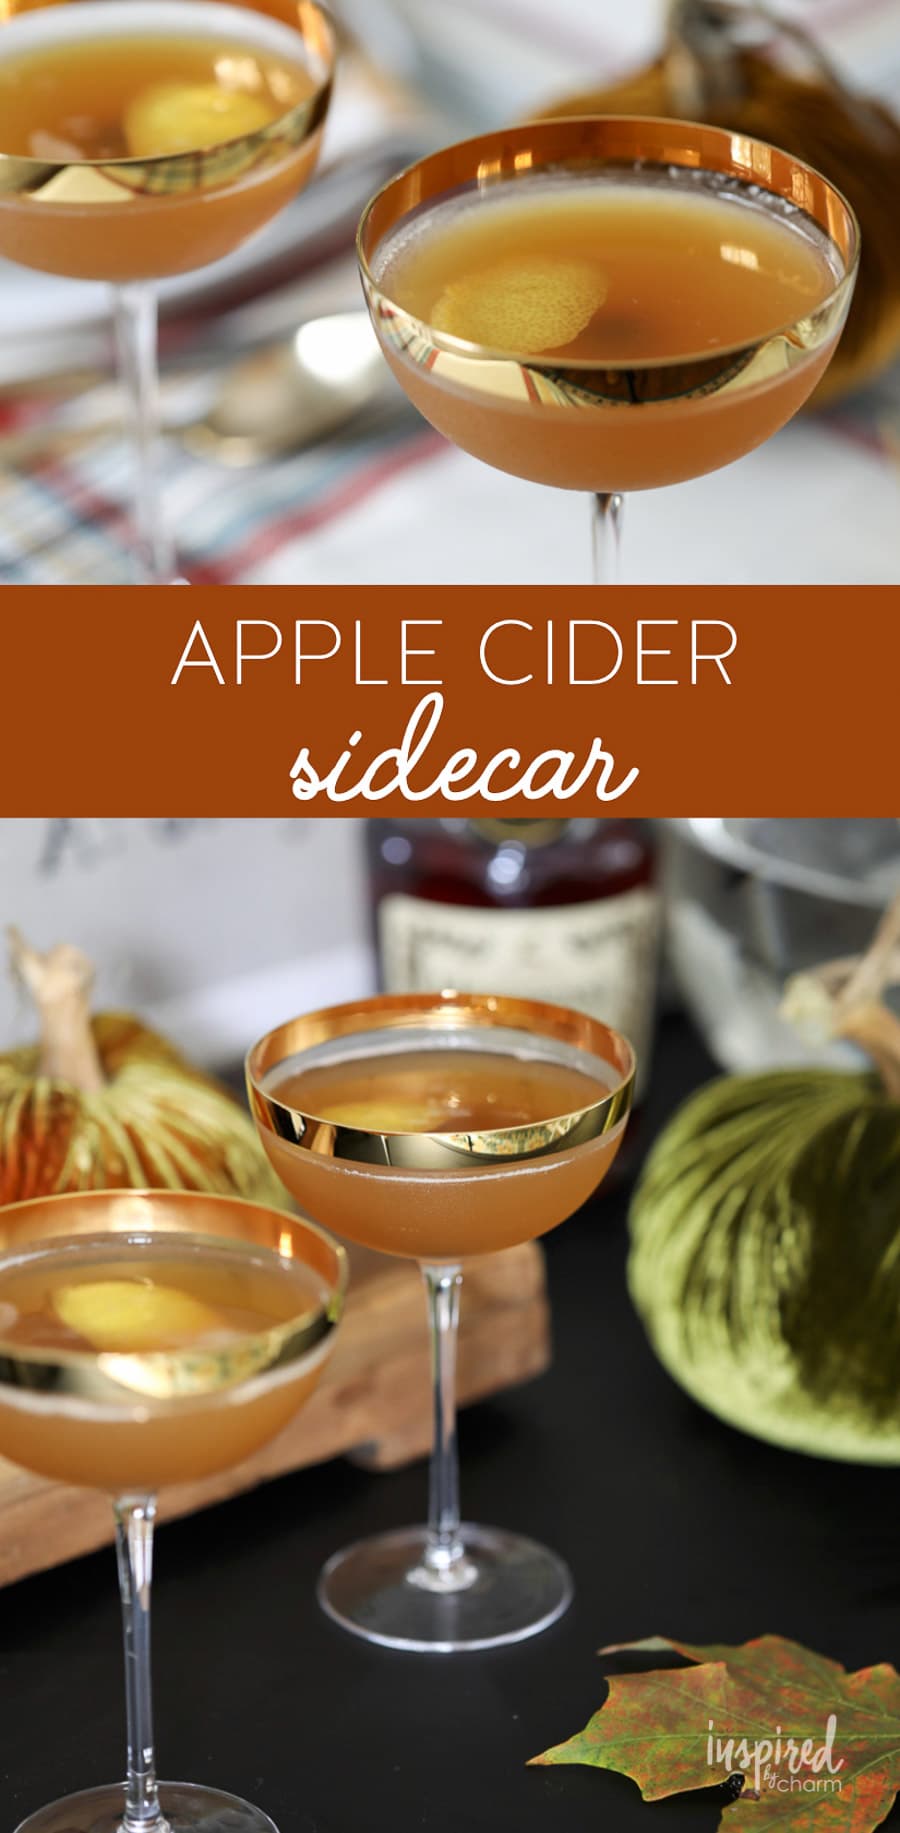 Apple Cider Sidecar - easy and delicious fall cocktail recipe. #sidecar #applecider #cocktail #fall #recipe